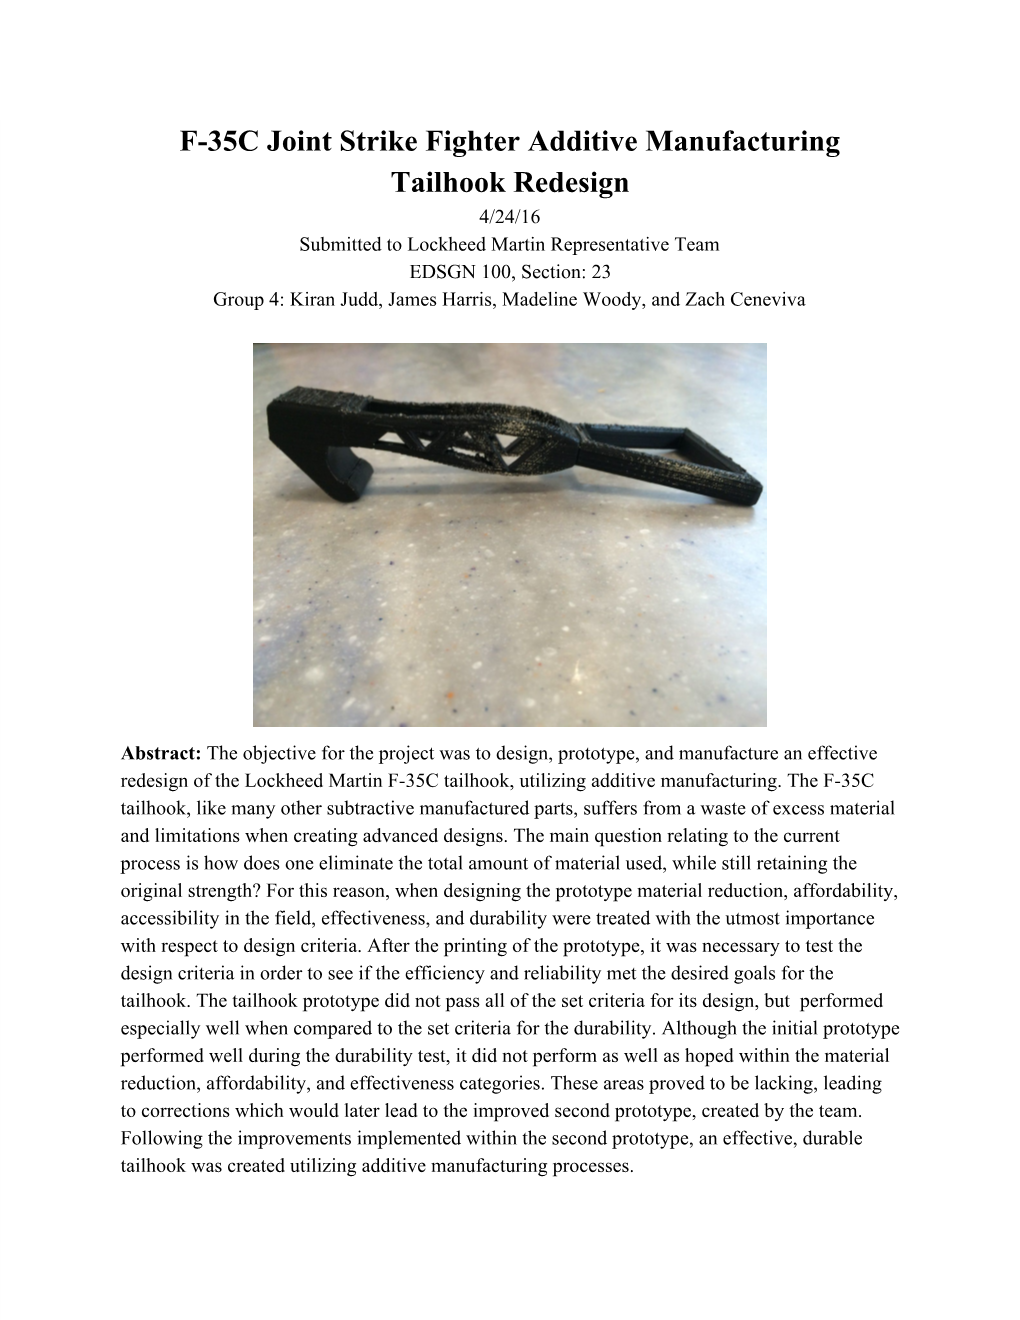 F35C Joint Strike Fighter Additive Manufacturing Tailhook Redesign